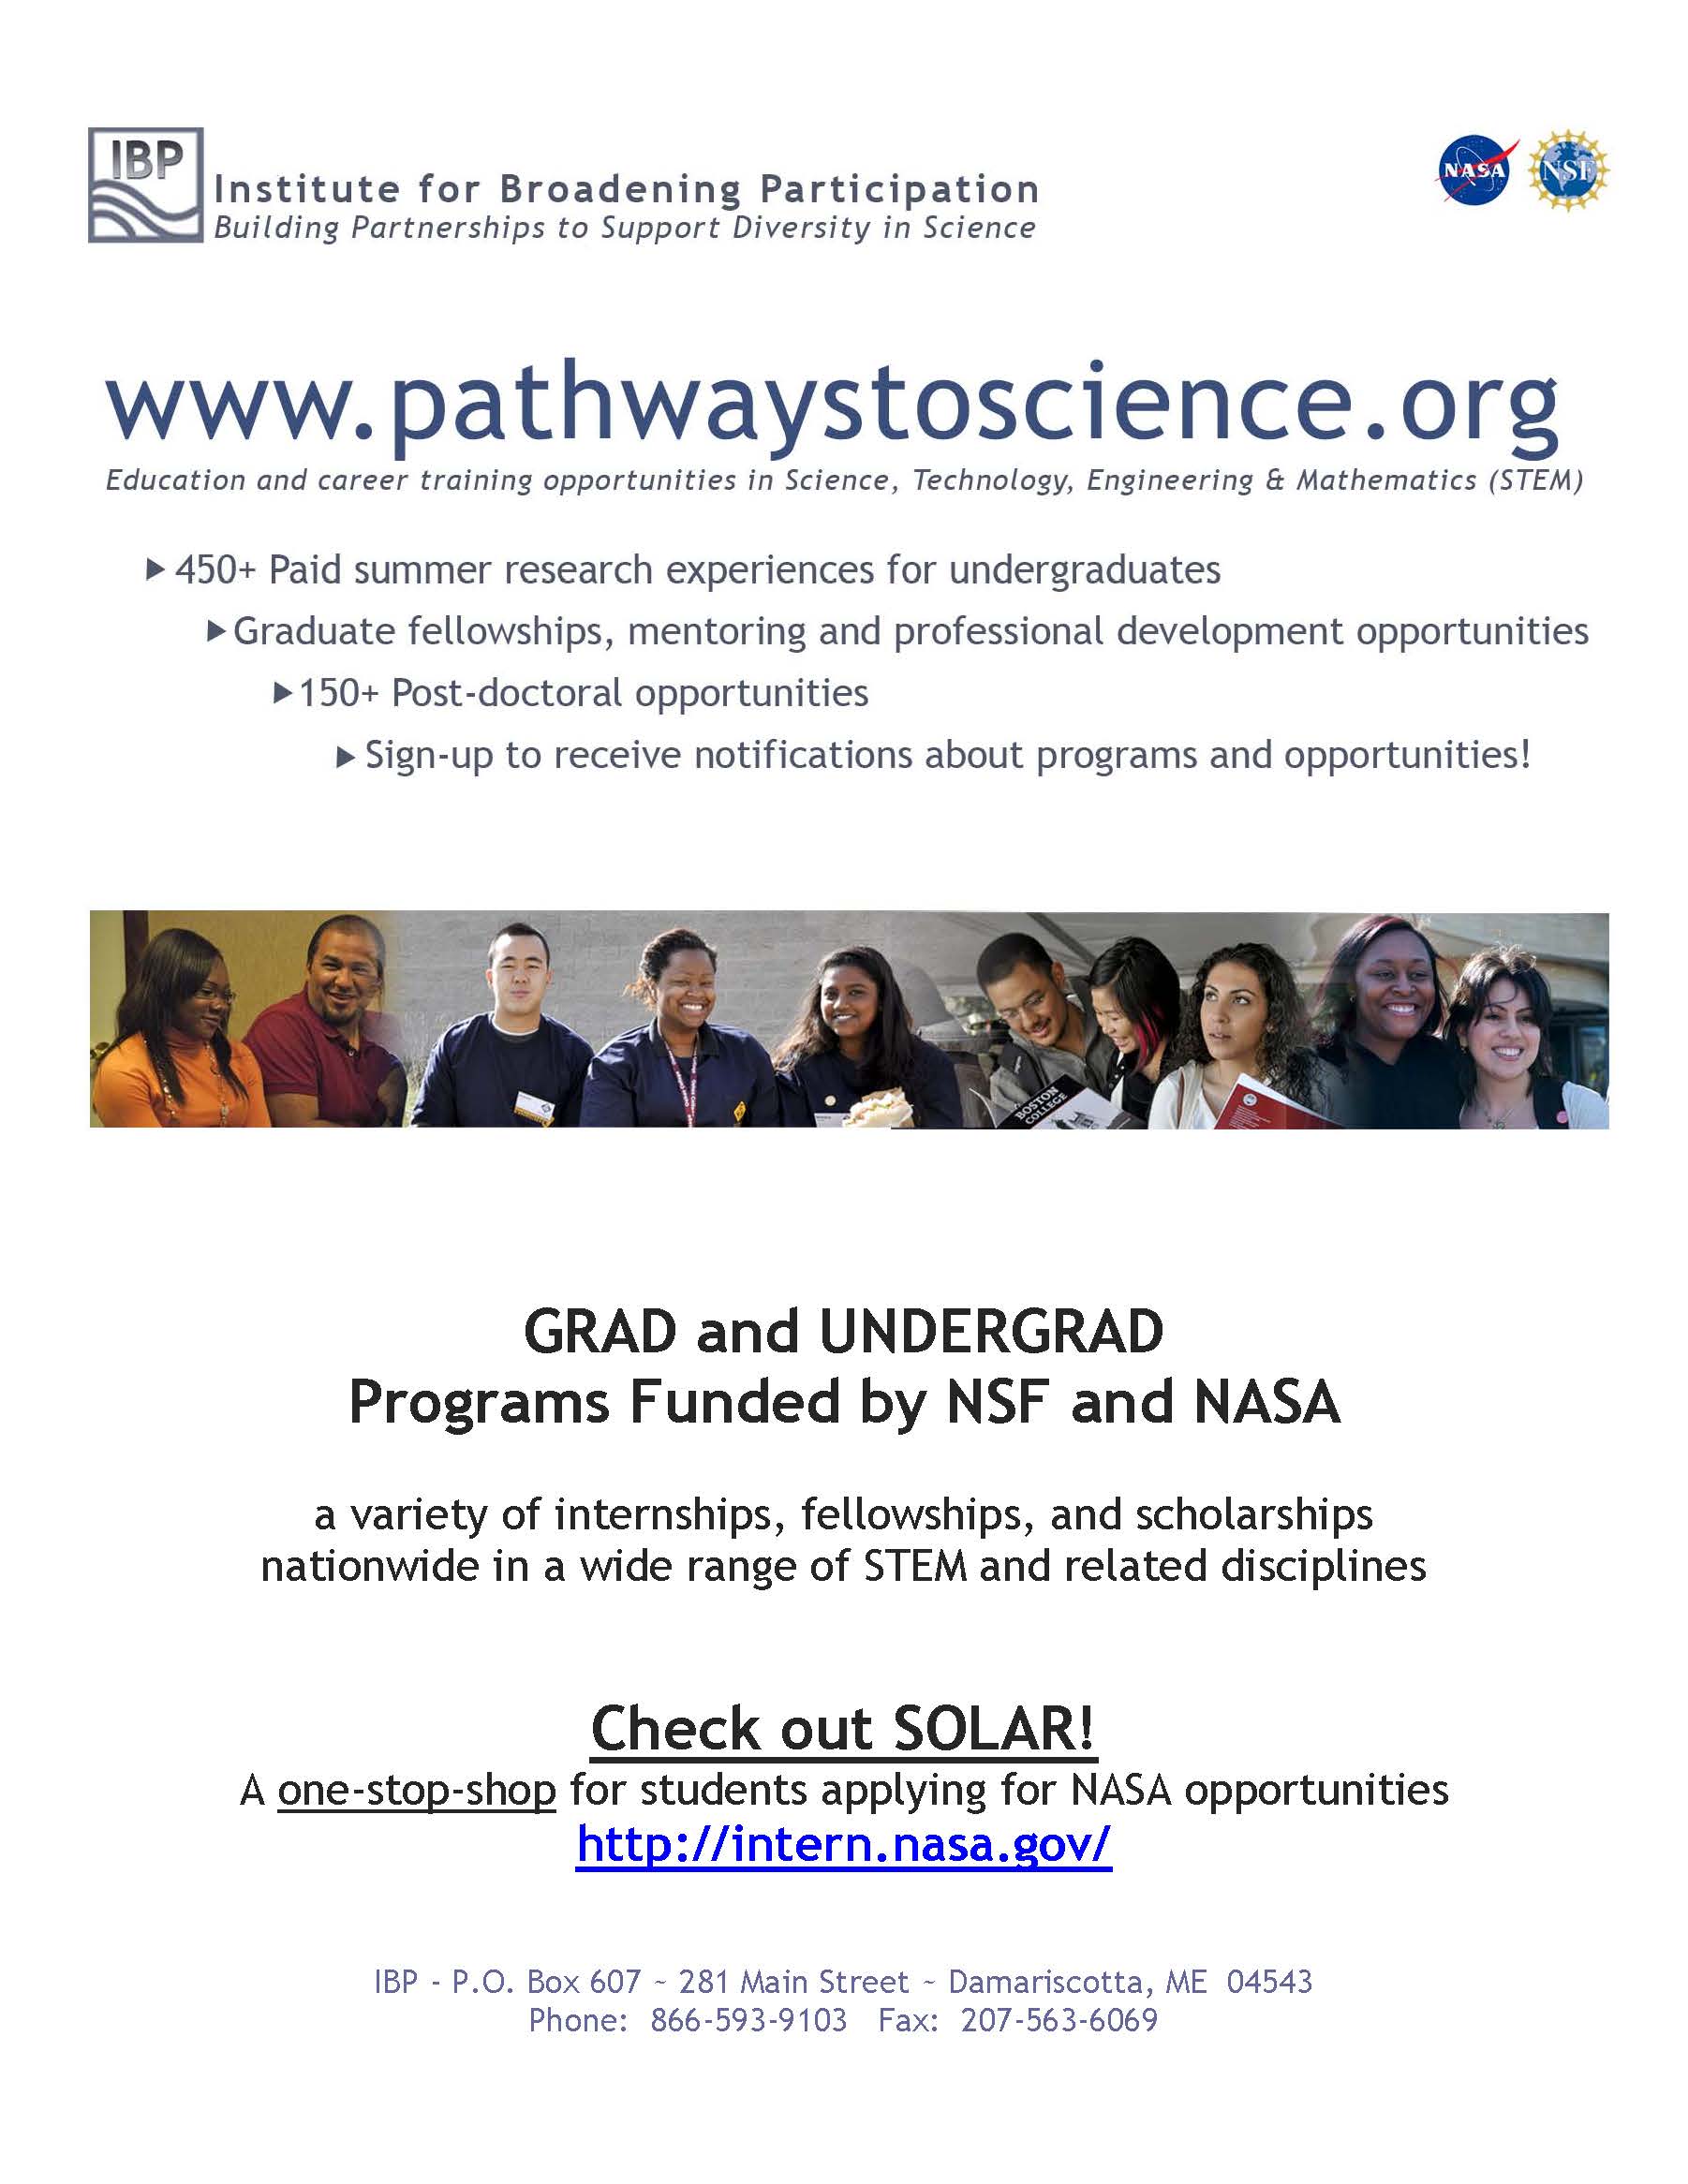 Pathways to Science flyer - Summer 2013